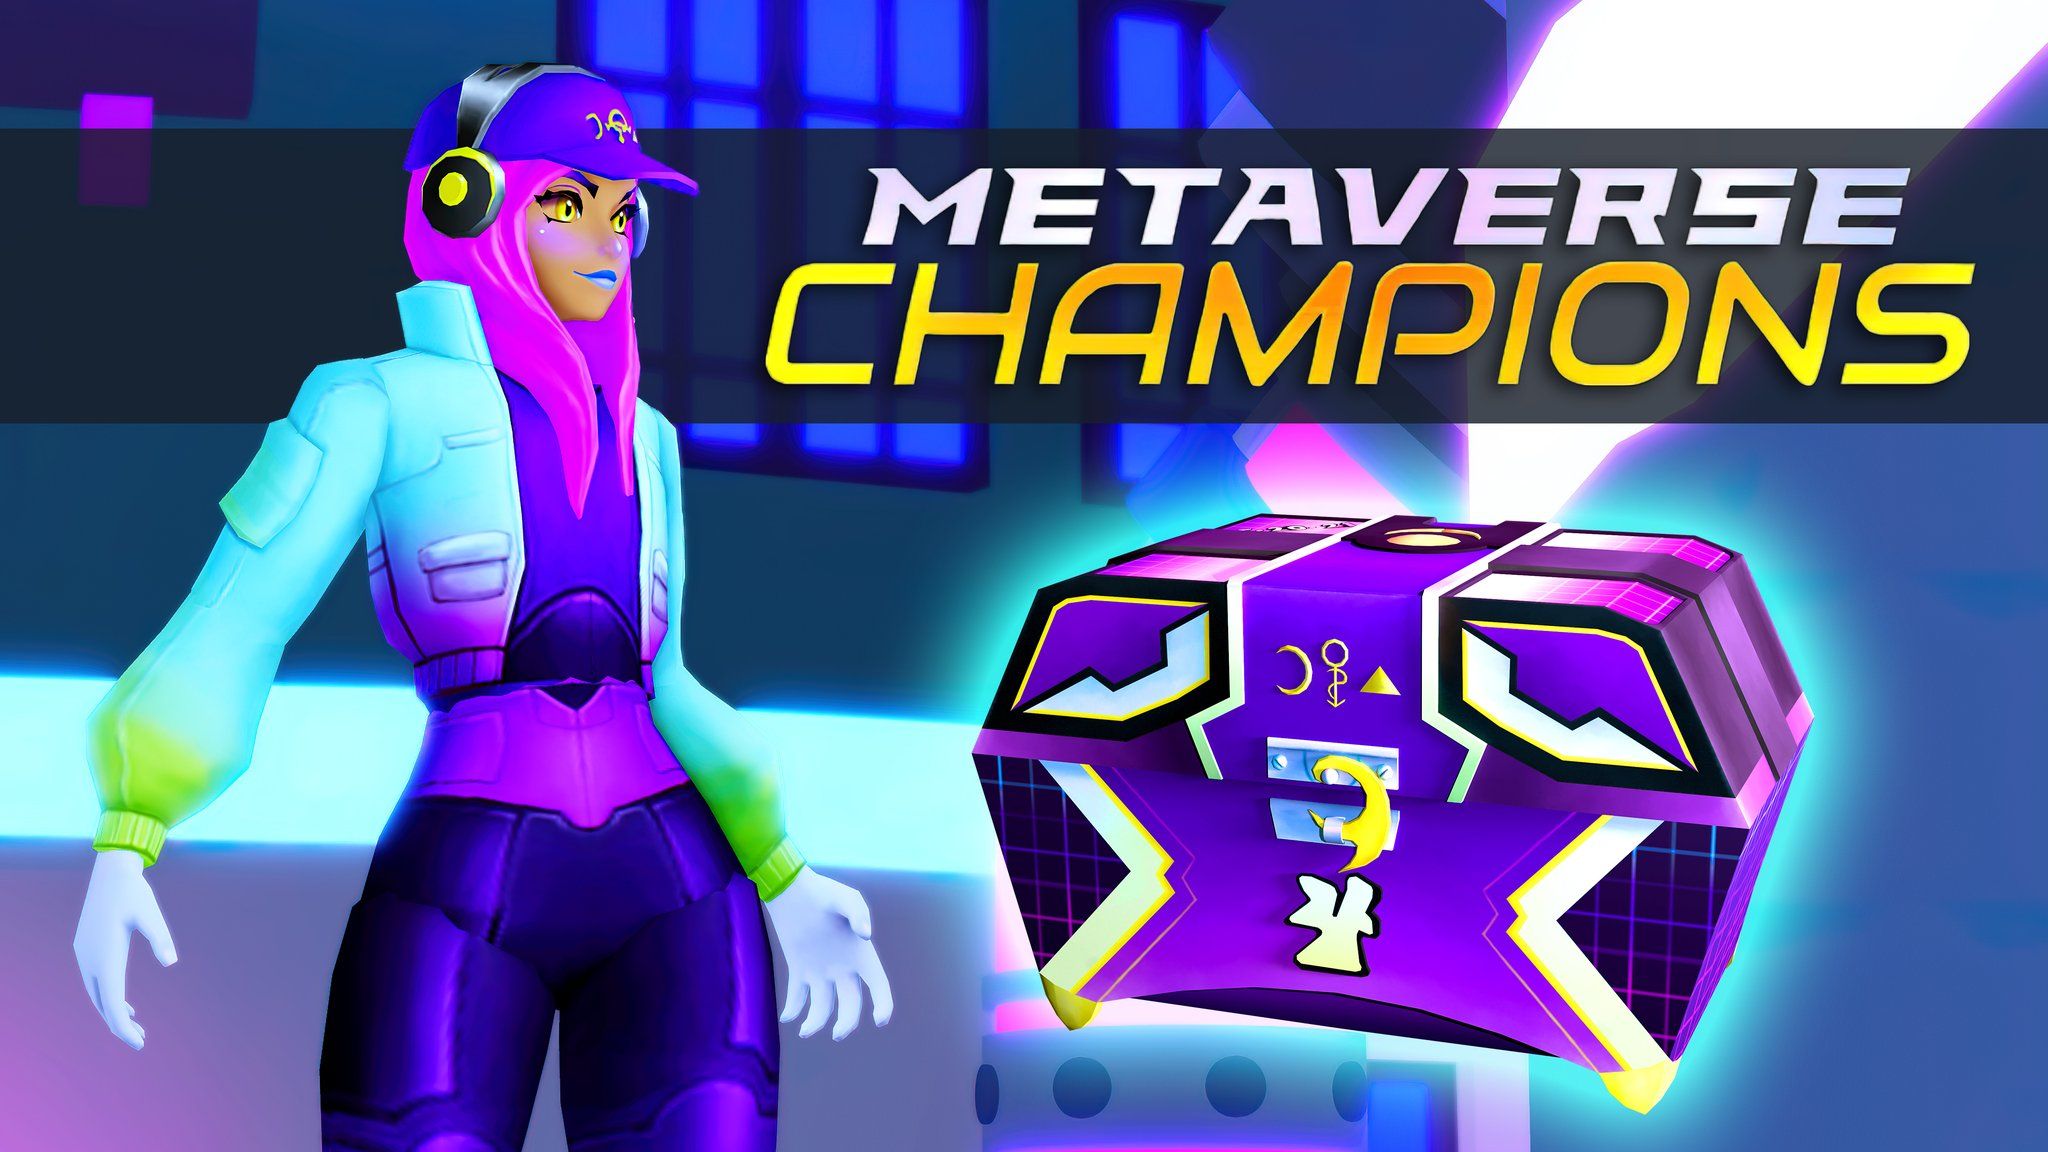 Roblox Battles's finally time. The #MetaverseChampions Event is coming to RB Battles! Join us on Team #FeyYoshida in uncovering the Mystery Box Virtual Items, completing the challenges, and more